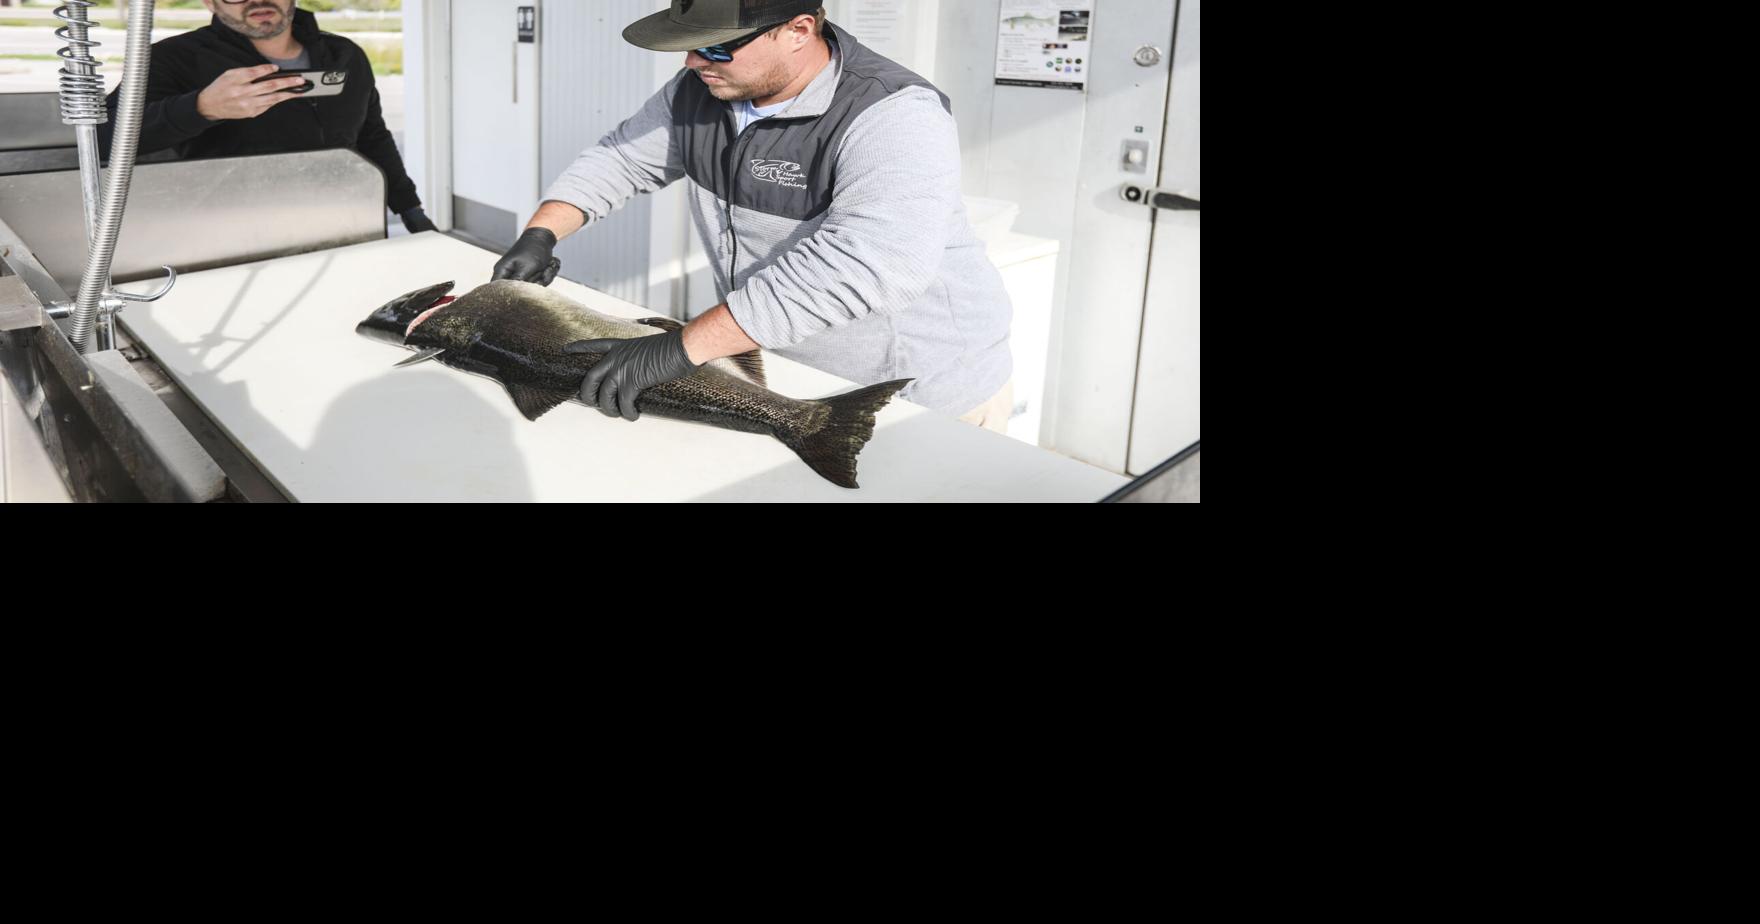 Stocked up: Alewife health spawns salmon boost | Local News | record-eagle.com